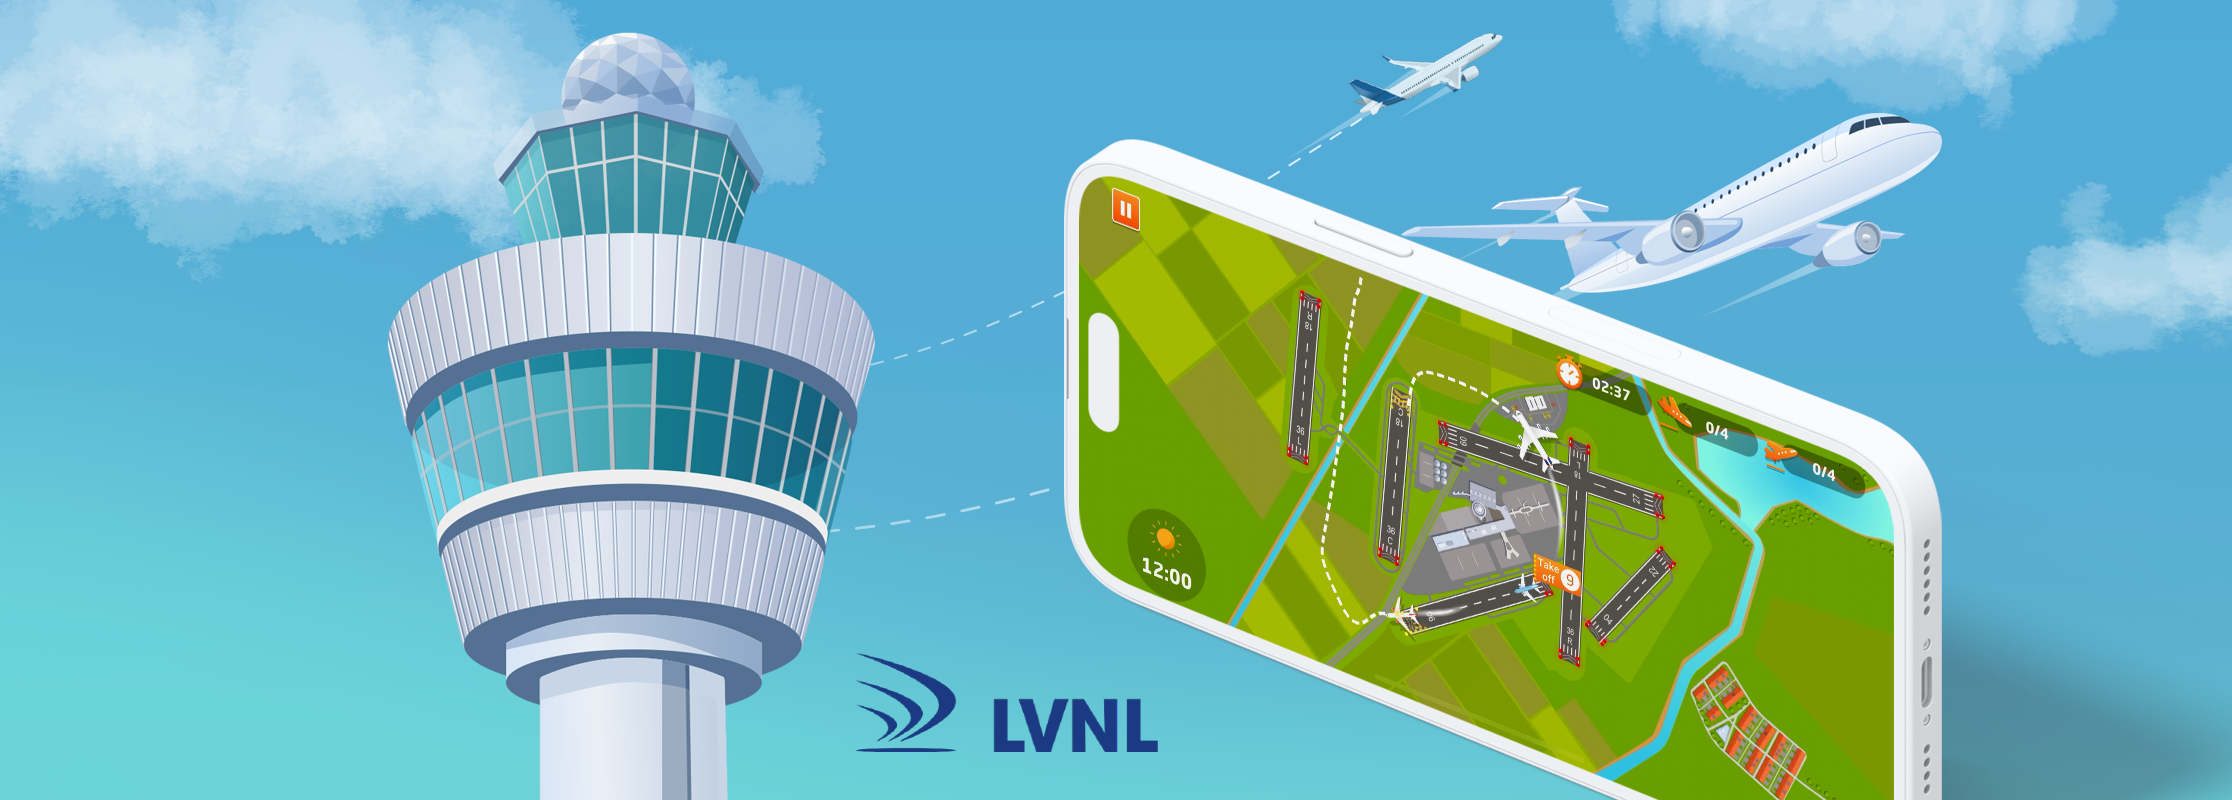 LVNL: manage air traffic control in this innovative game